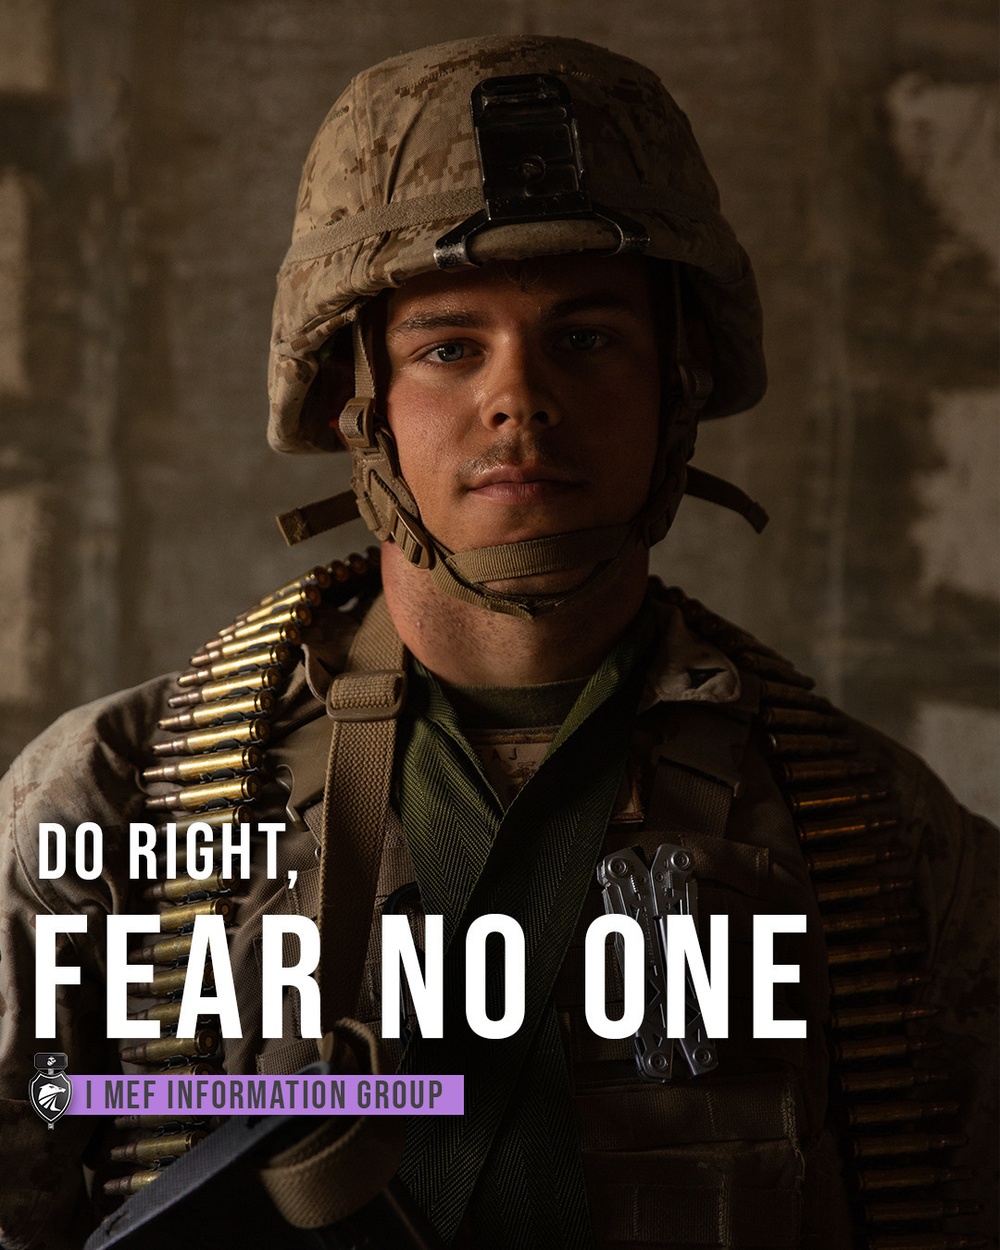 Do right, fear no one